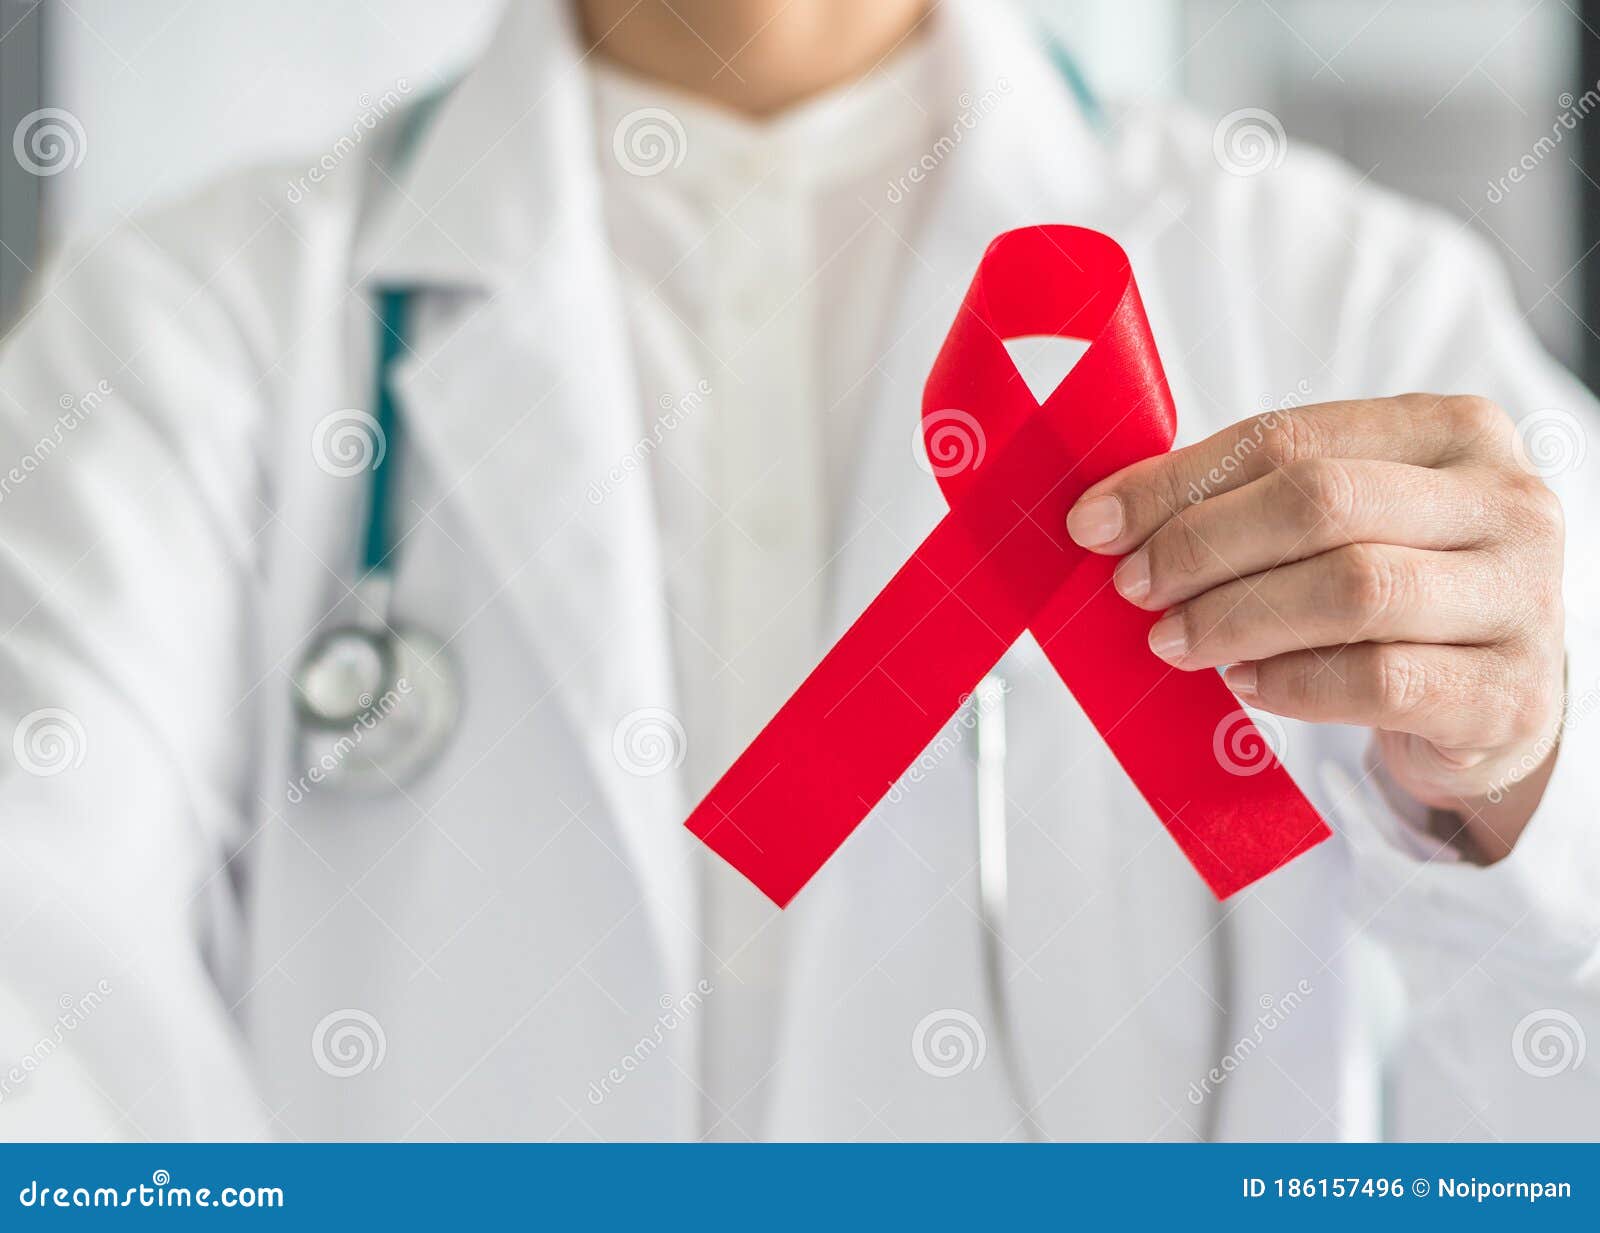 aids red ribbon in doctorÃ¢â¬â¢s hand for world aids dayand hiv virus awareness concept